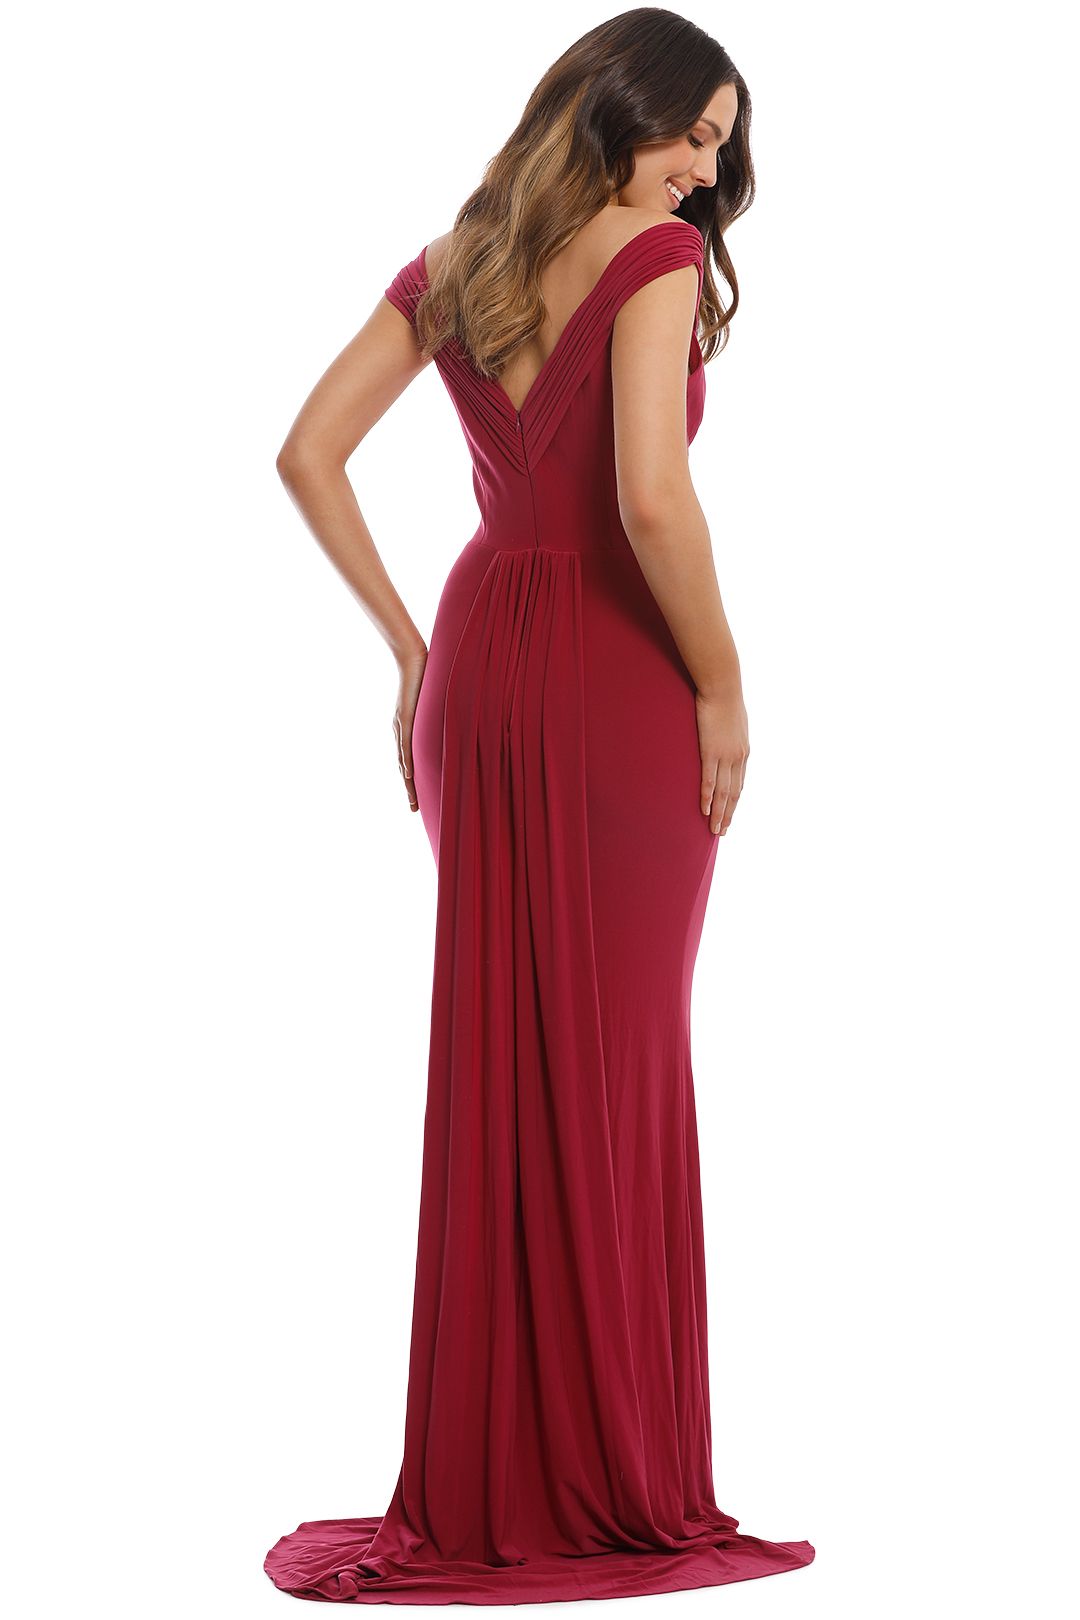 Tania Olsen - Malissa Gown - Berry - Back 